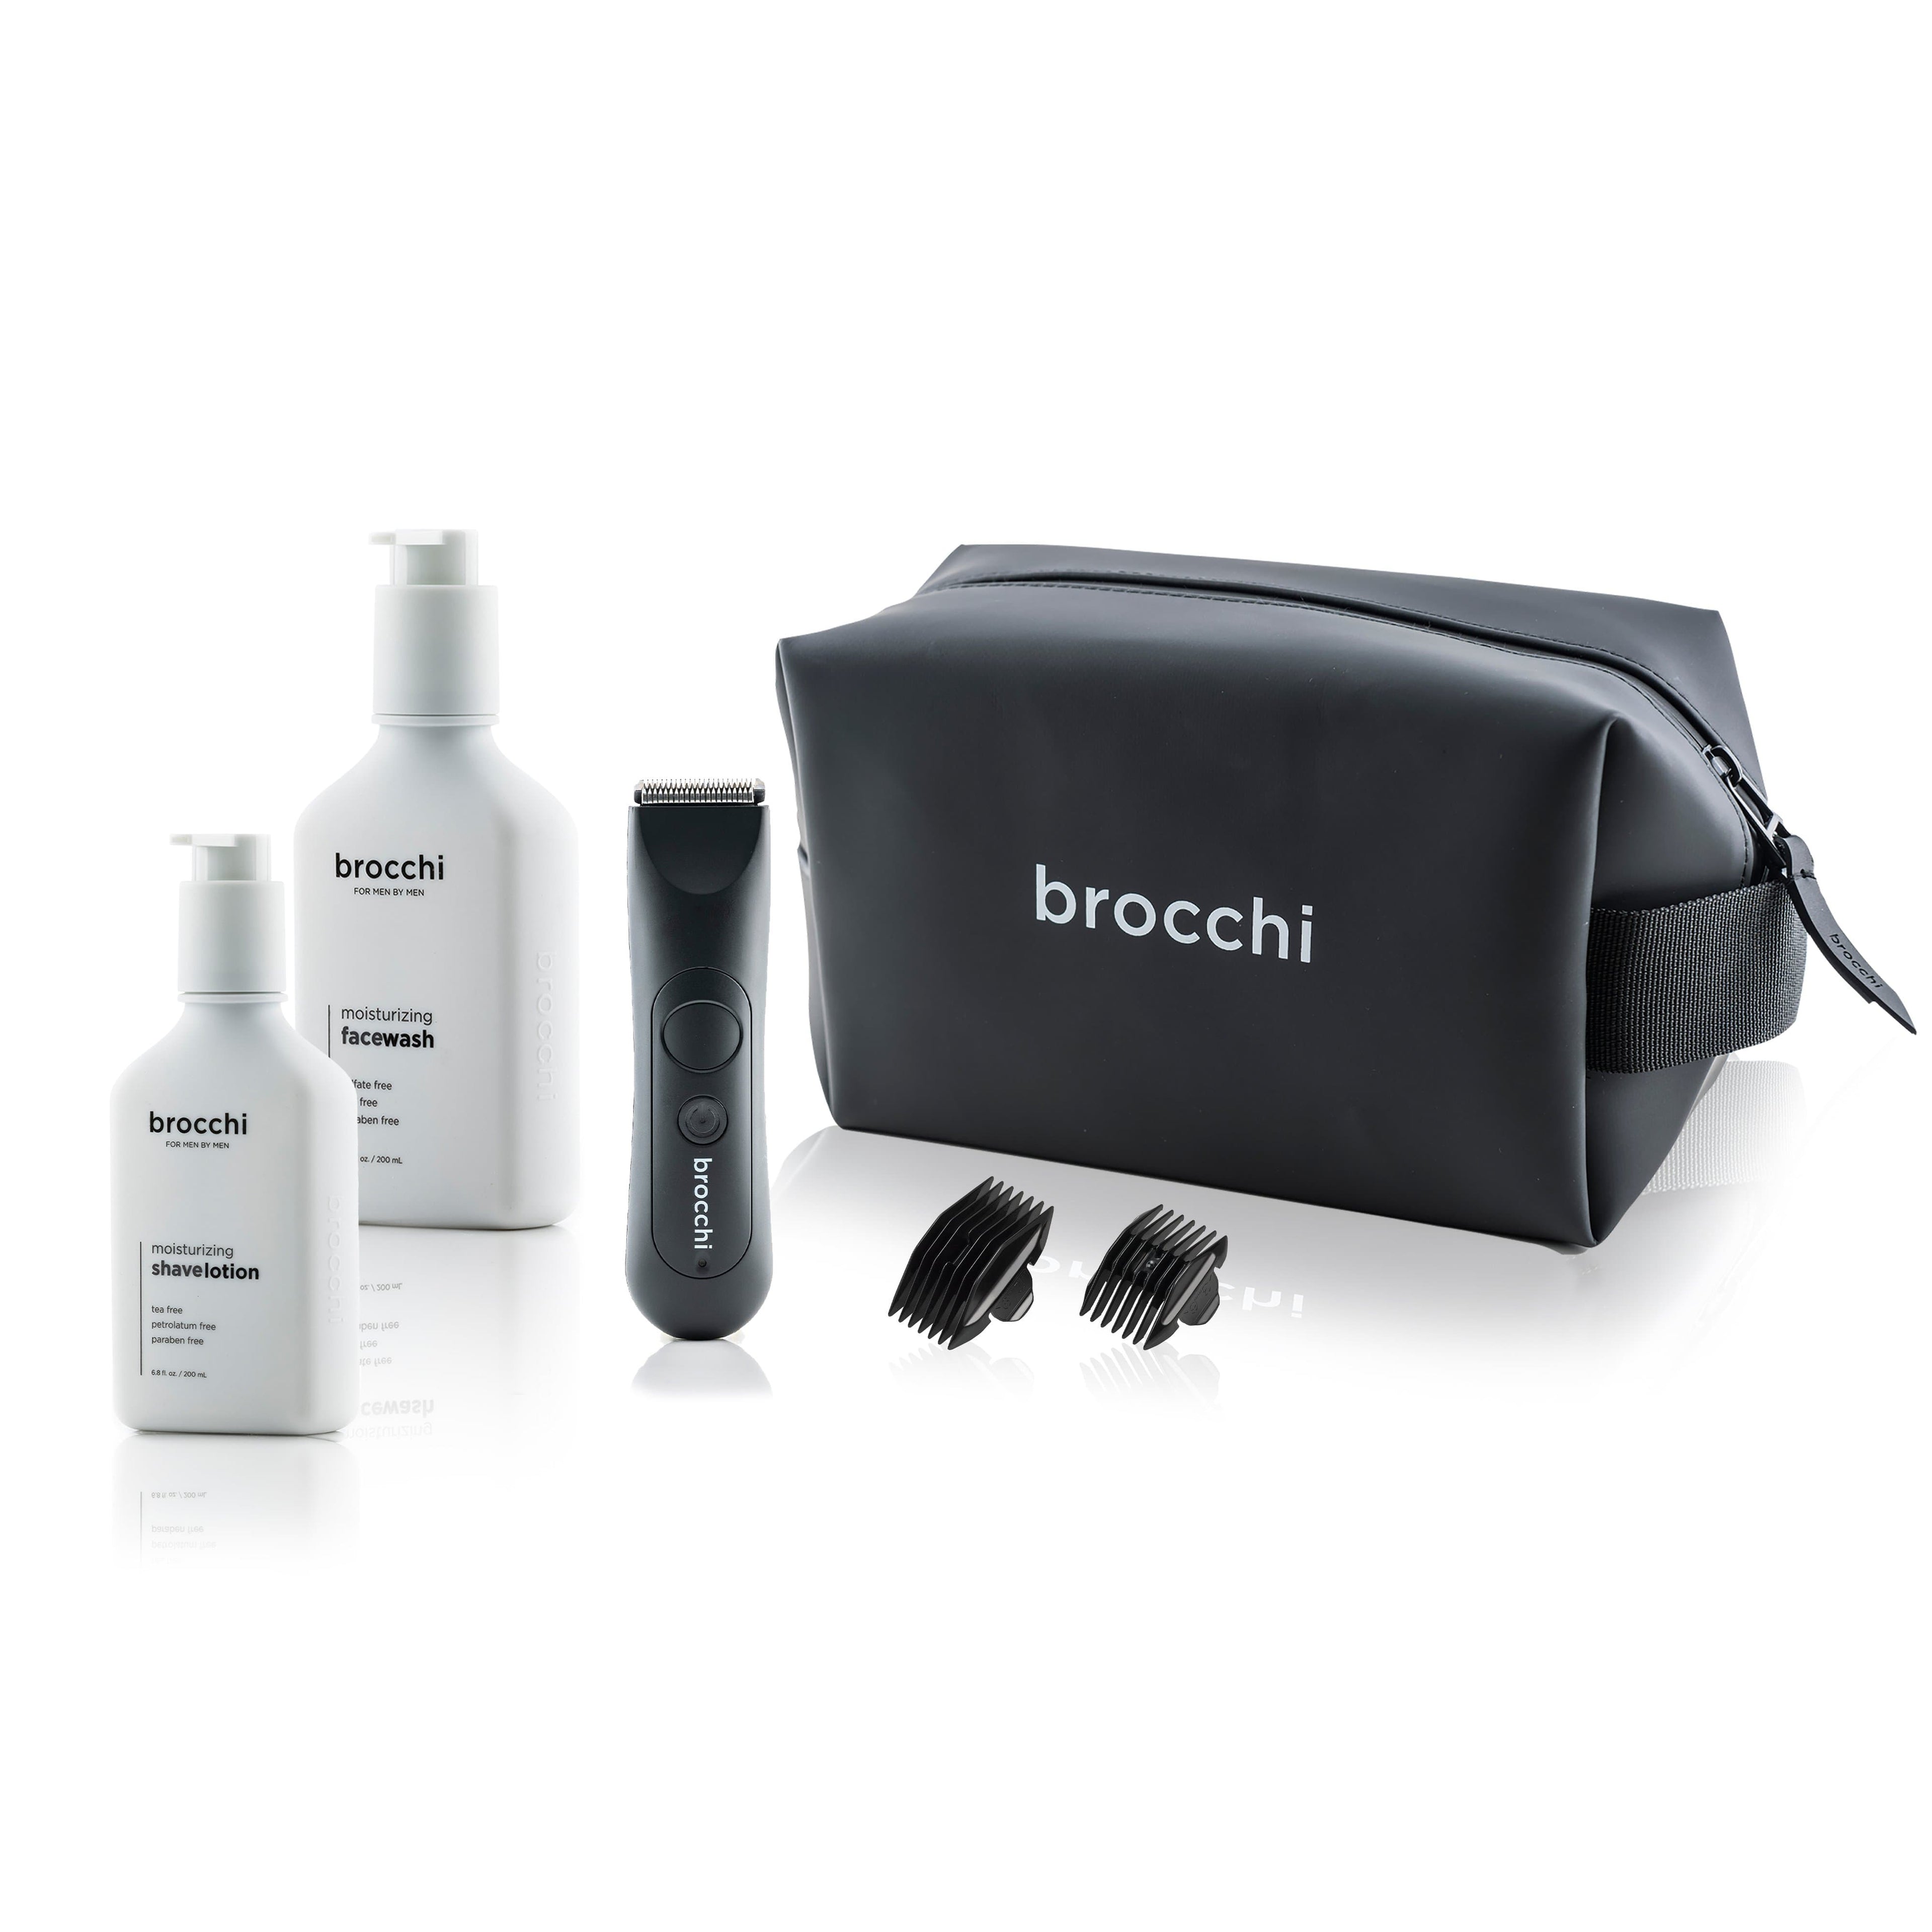 Brocchi Waterproof USB Trimmer, Shave Lotion, Body Wash &amp; Travel Bag